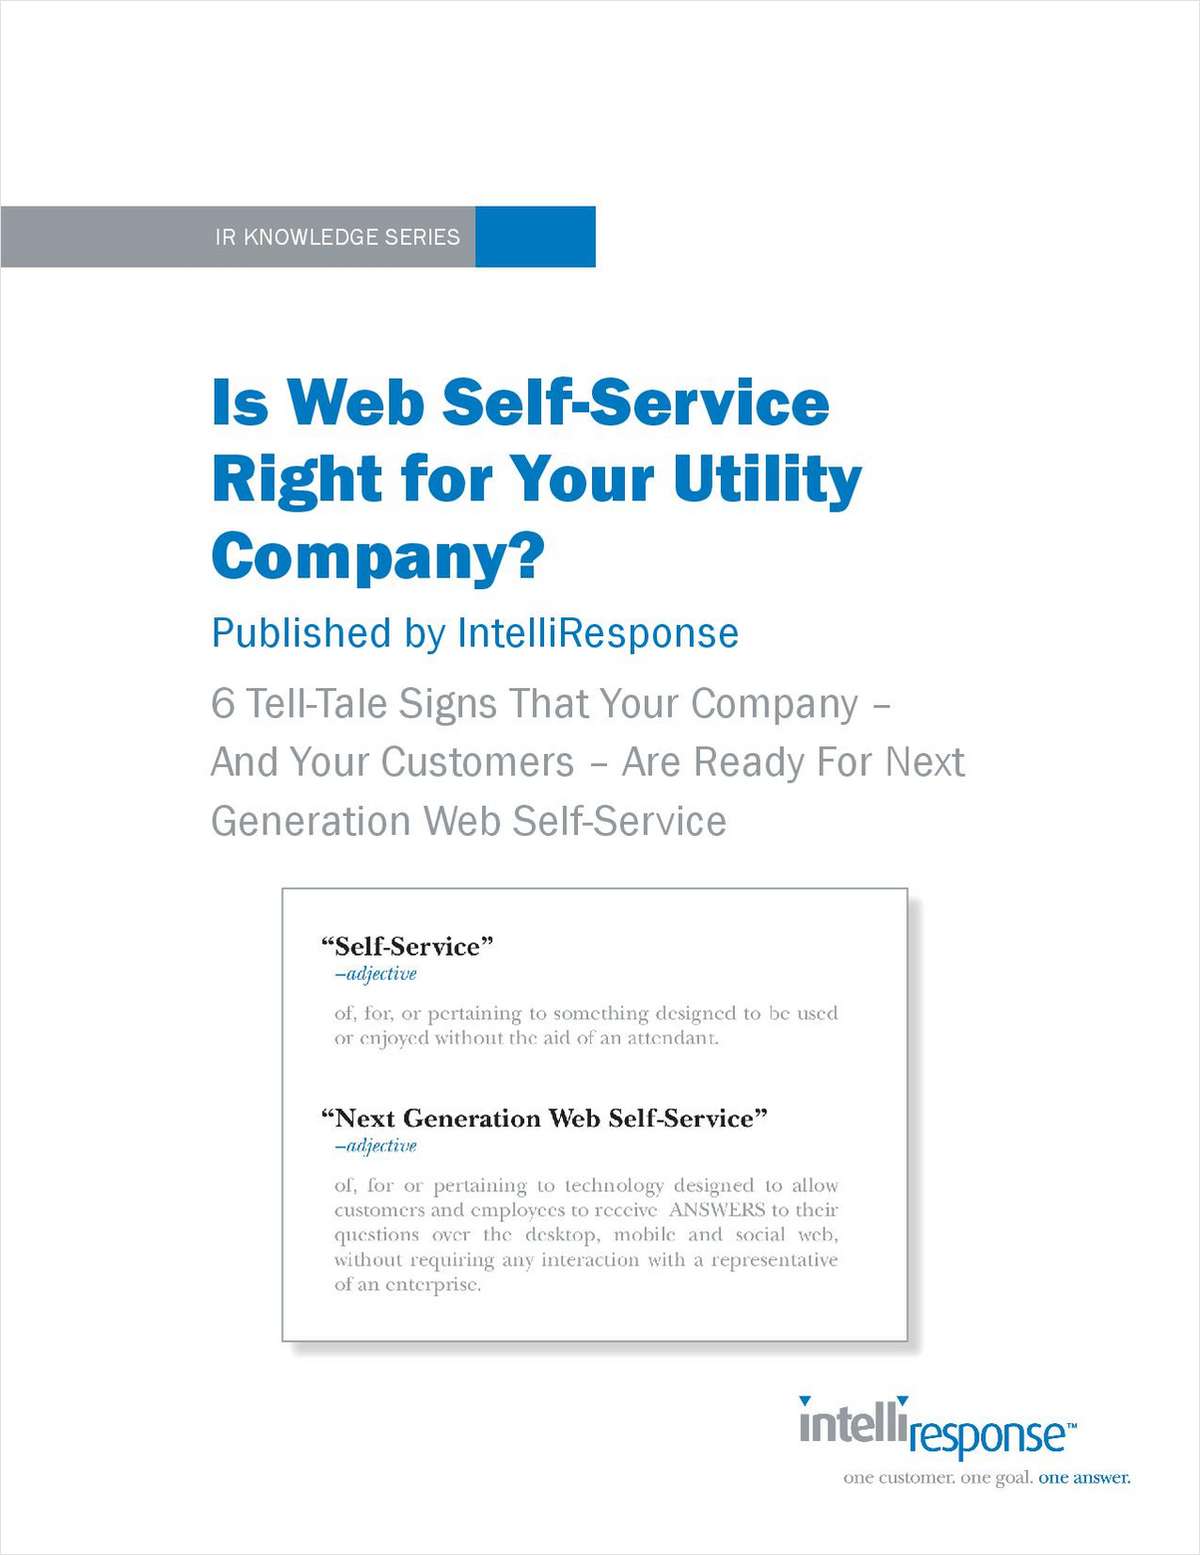 Is Web Self-Service Right for Your Utility Company?